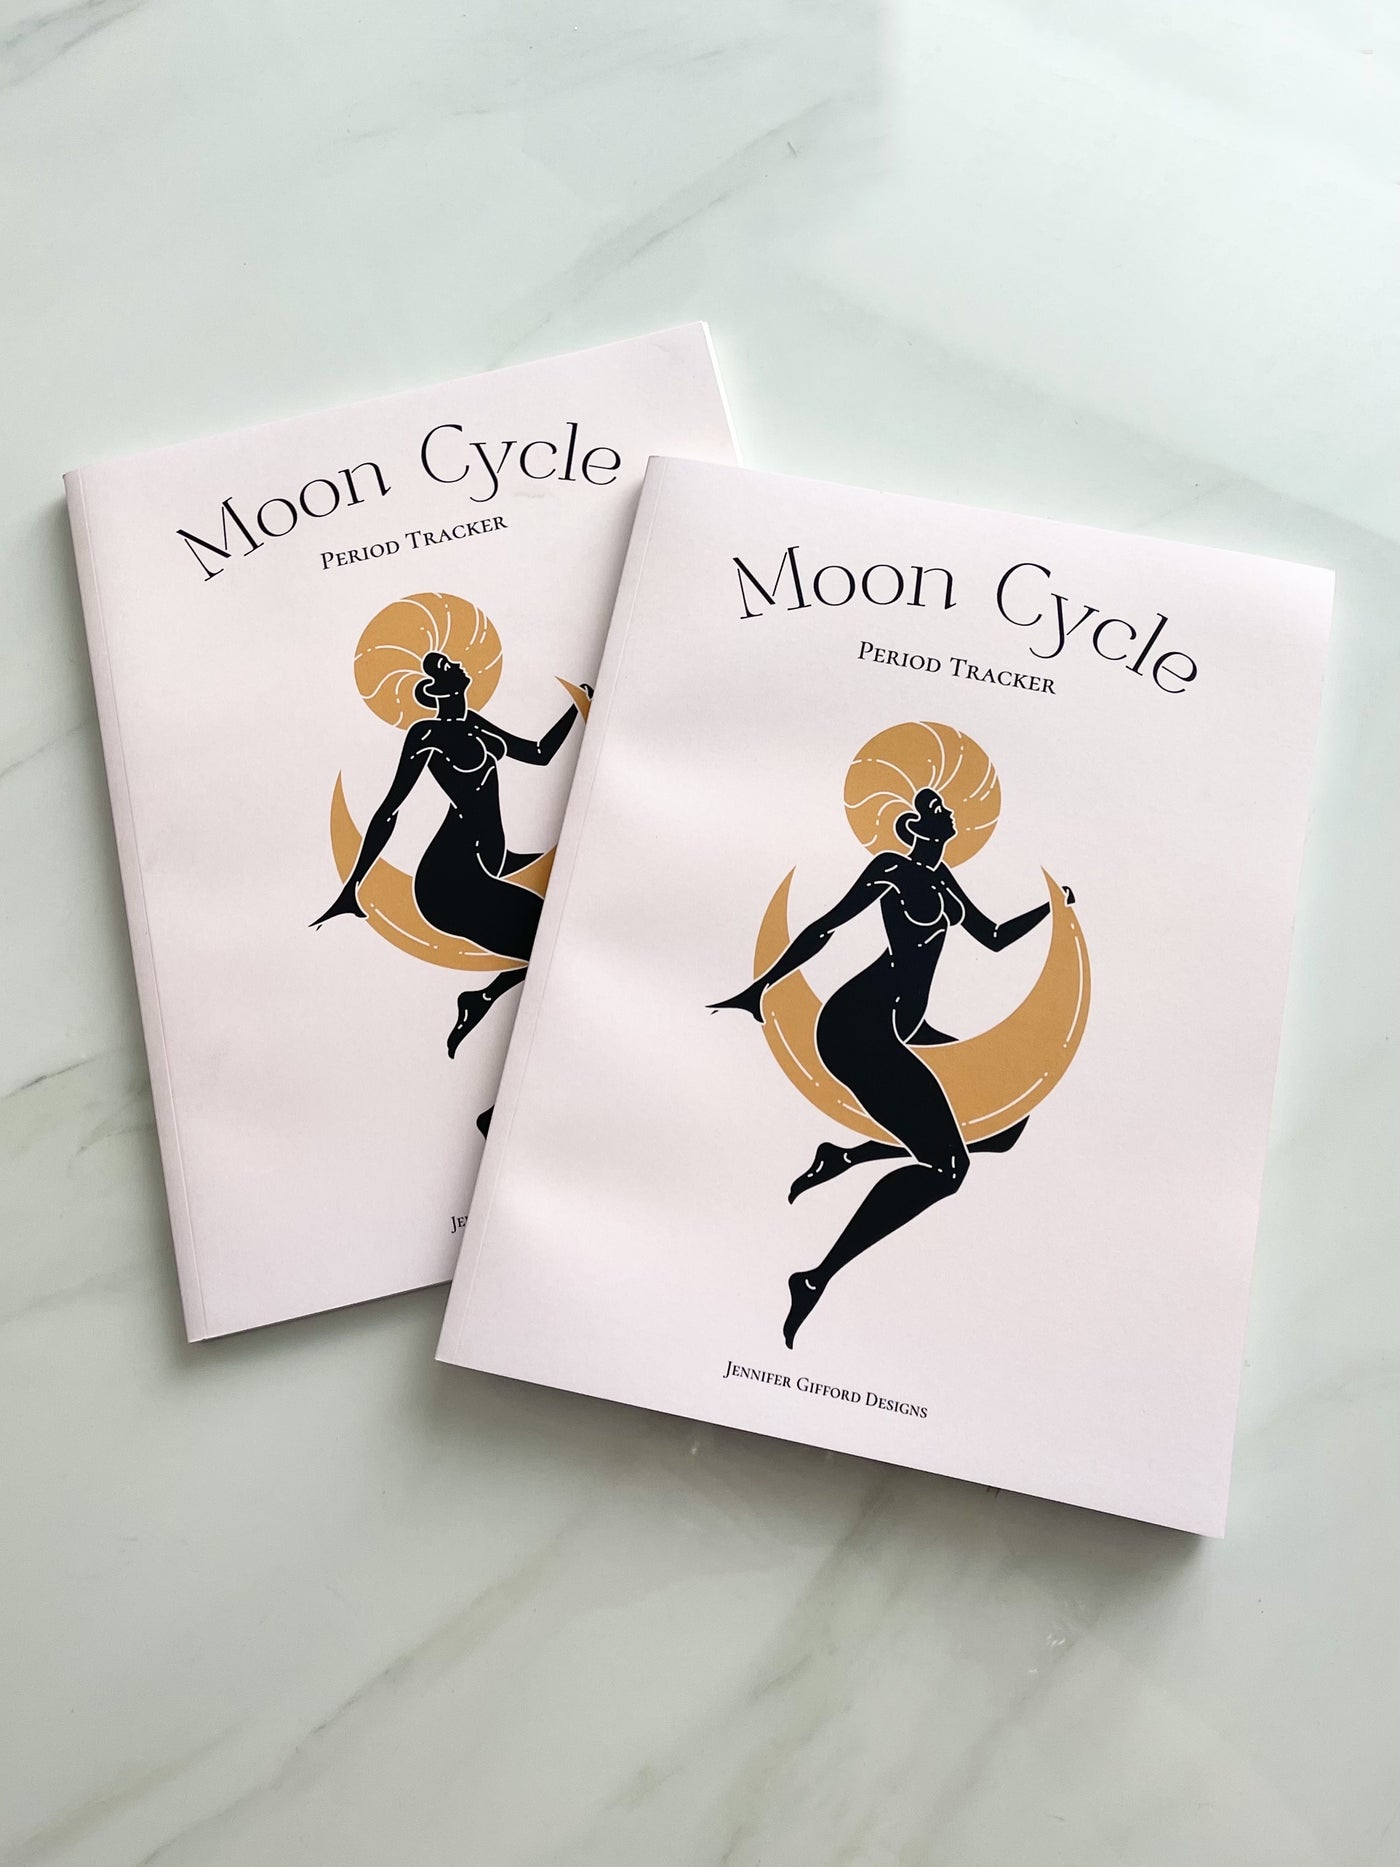 Moon Cycle Period Tracker